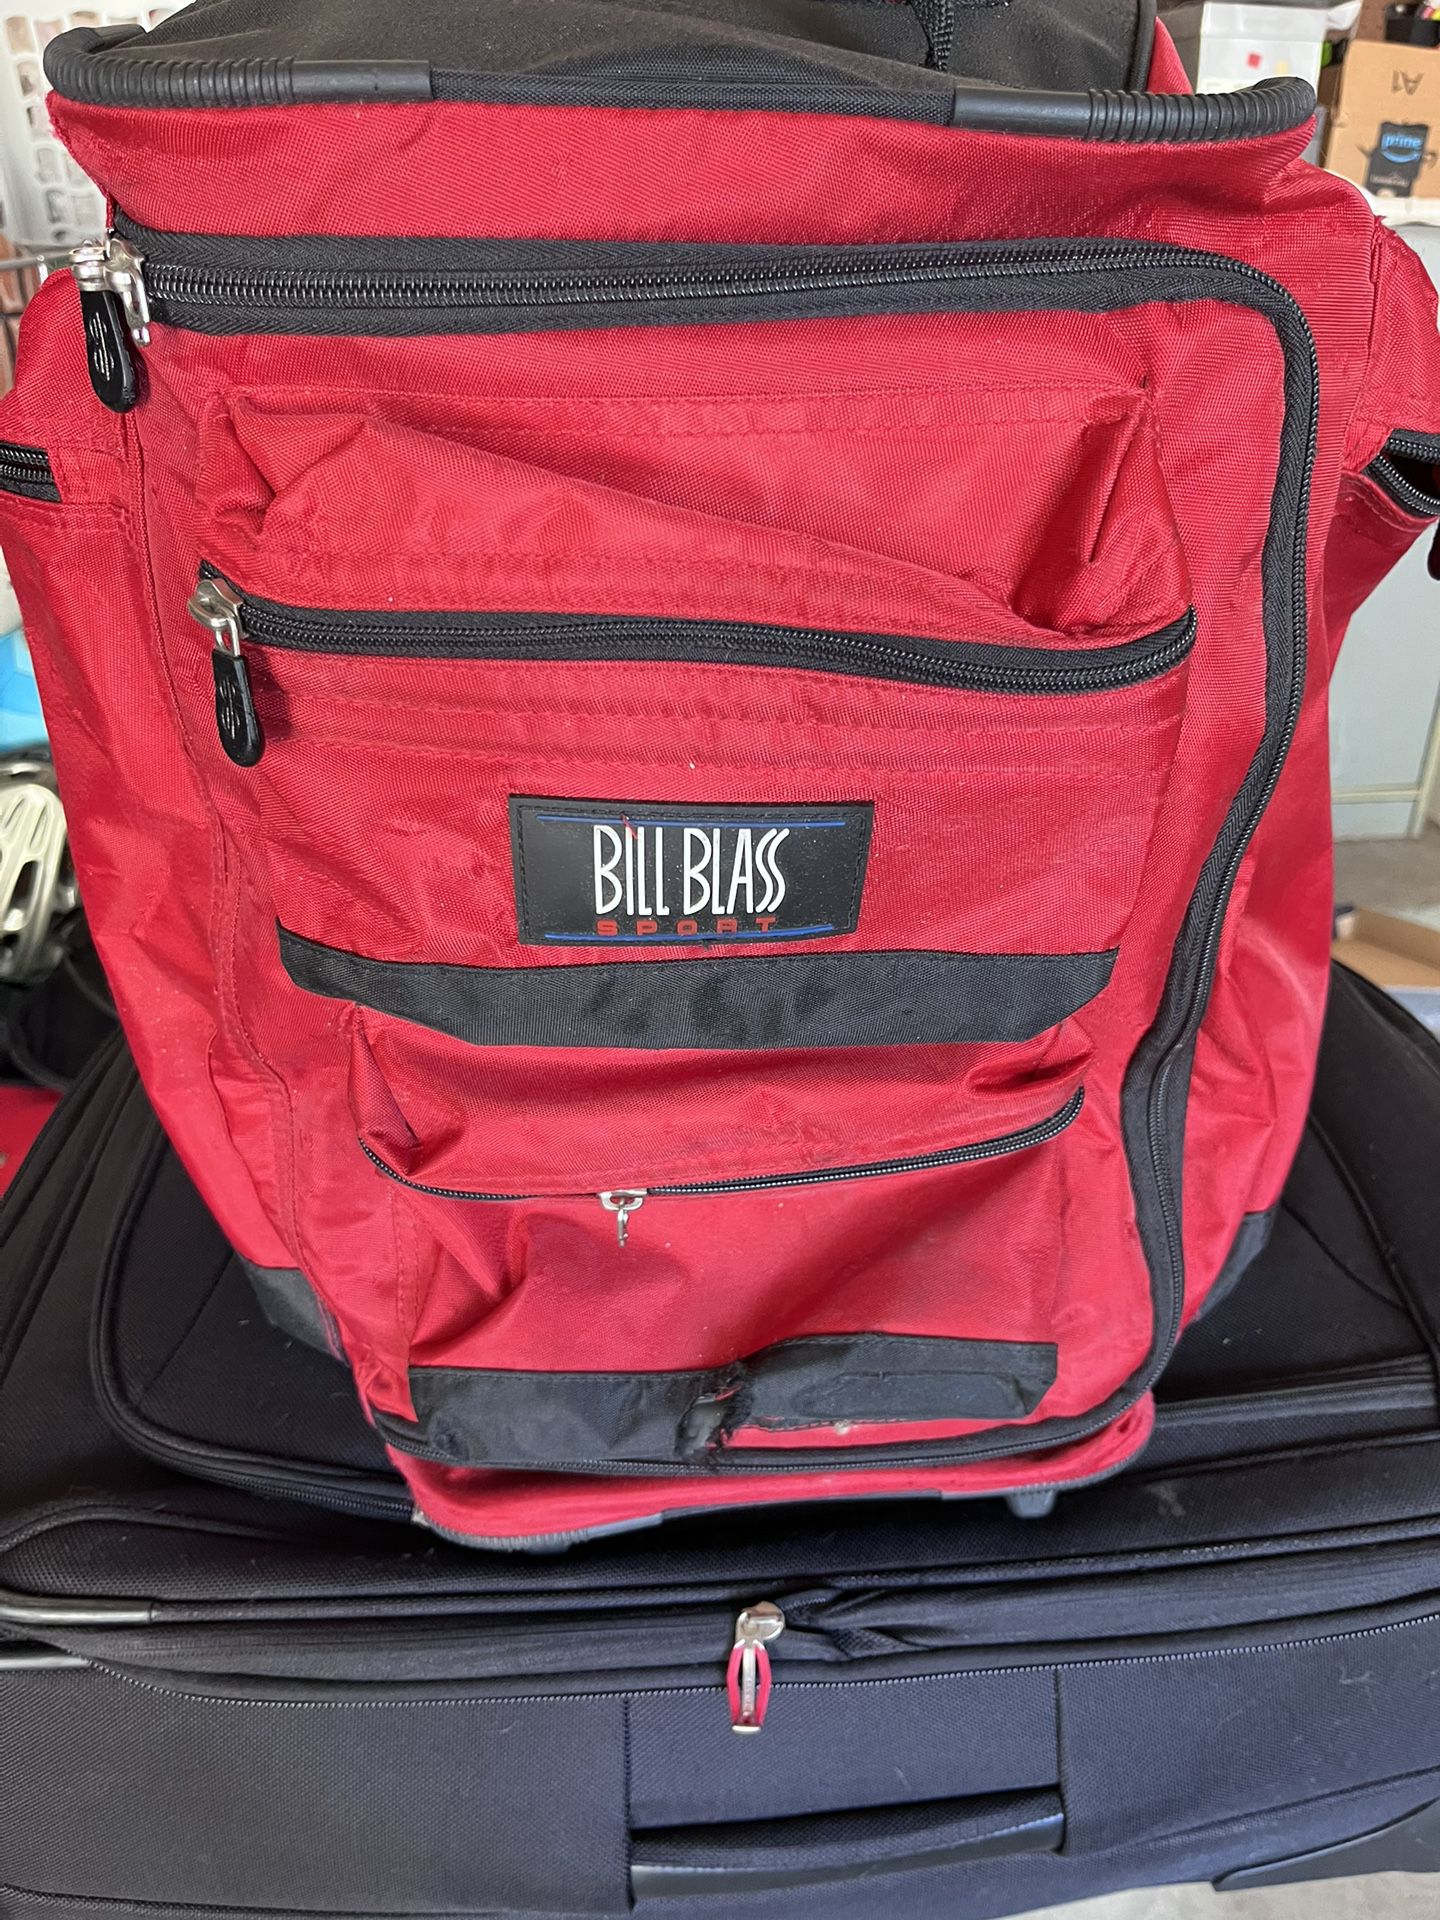 Bill Blass Red Rolling Carry On Bag